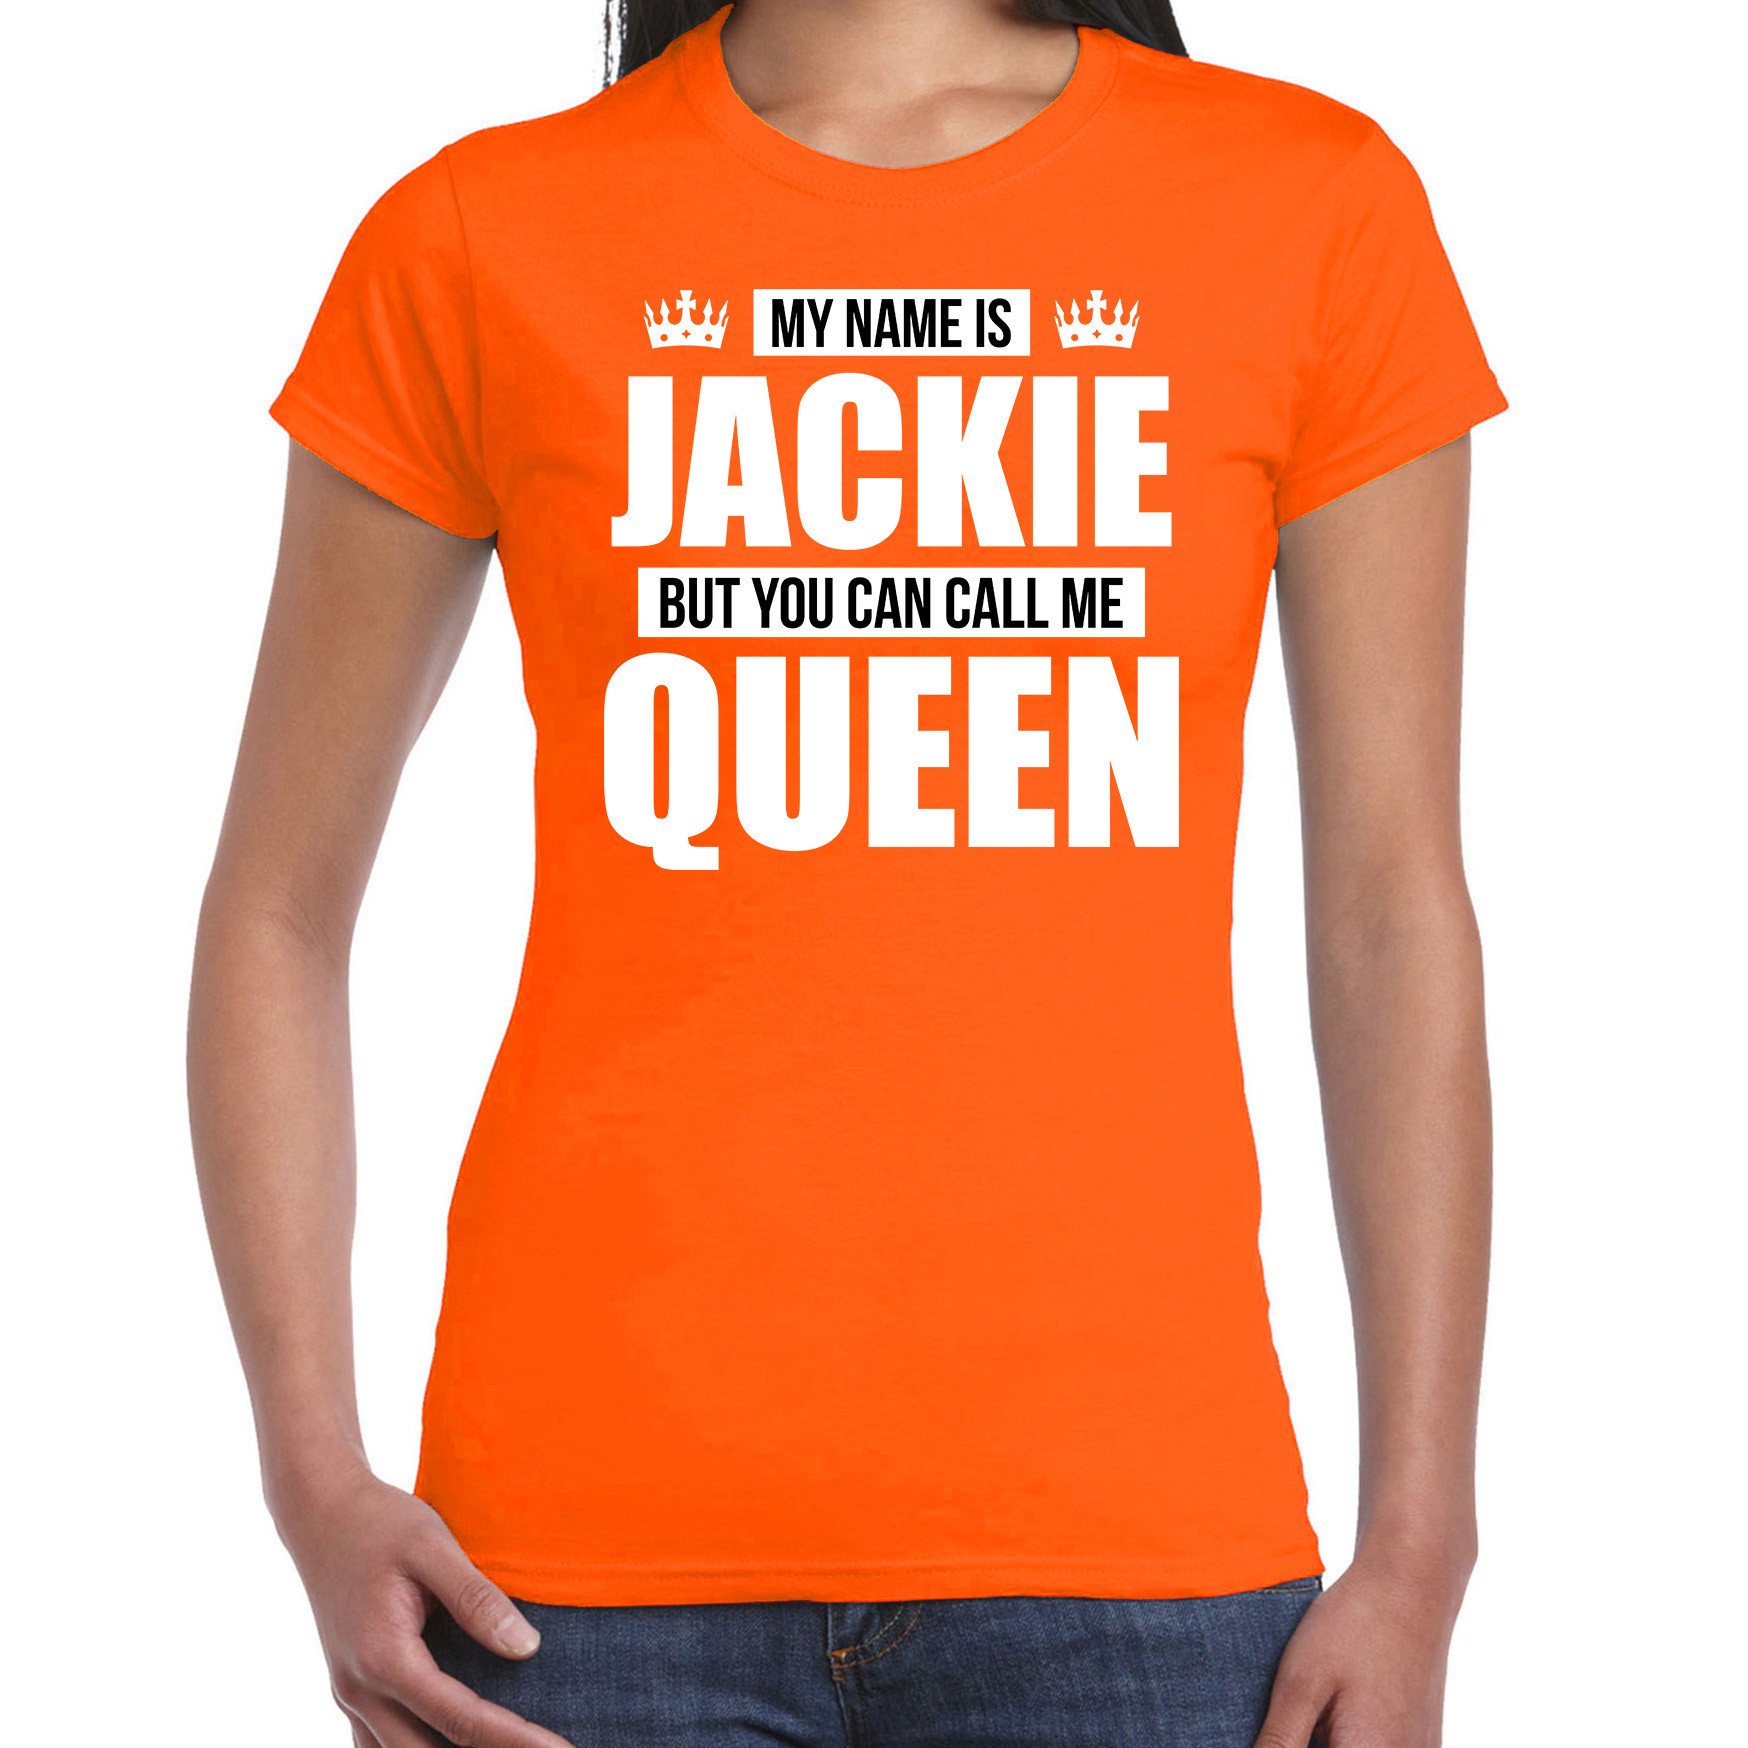 Naam My name is Jackie but you can call me Queen shirt oranje cadeau shirt dames